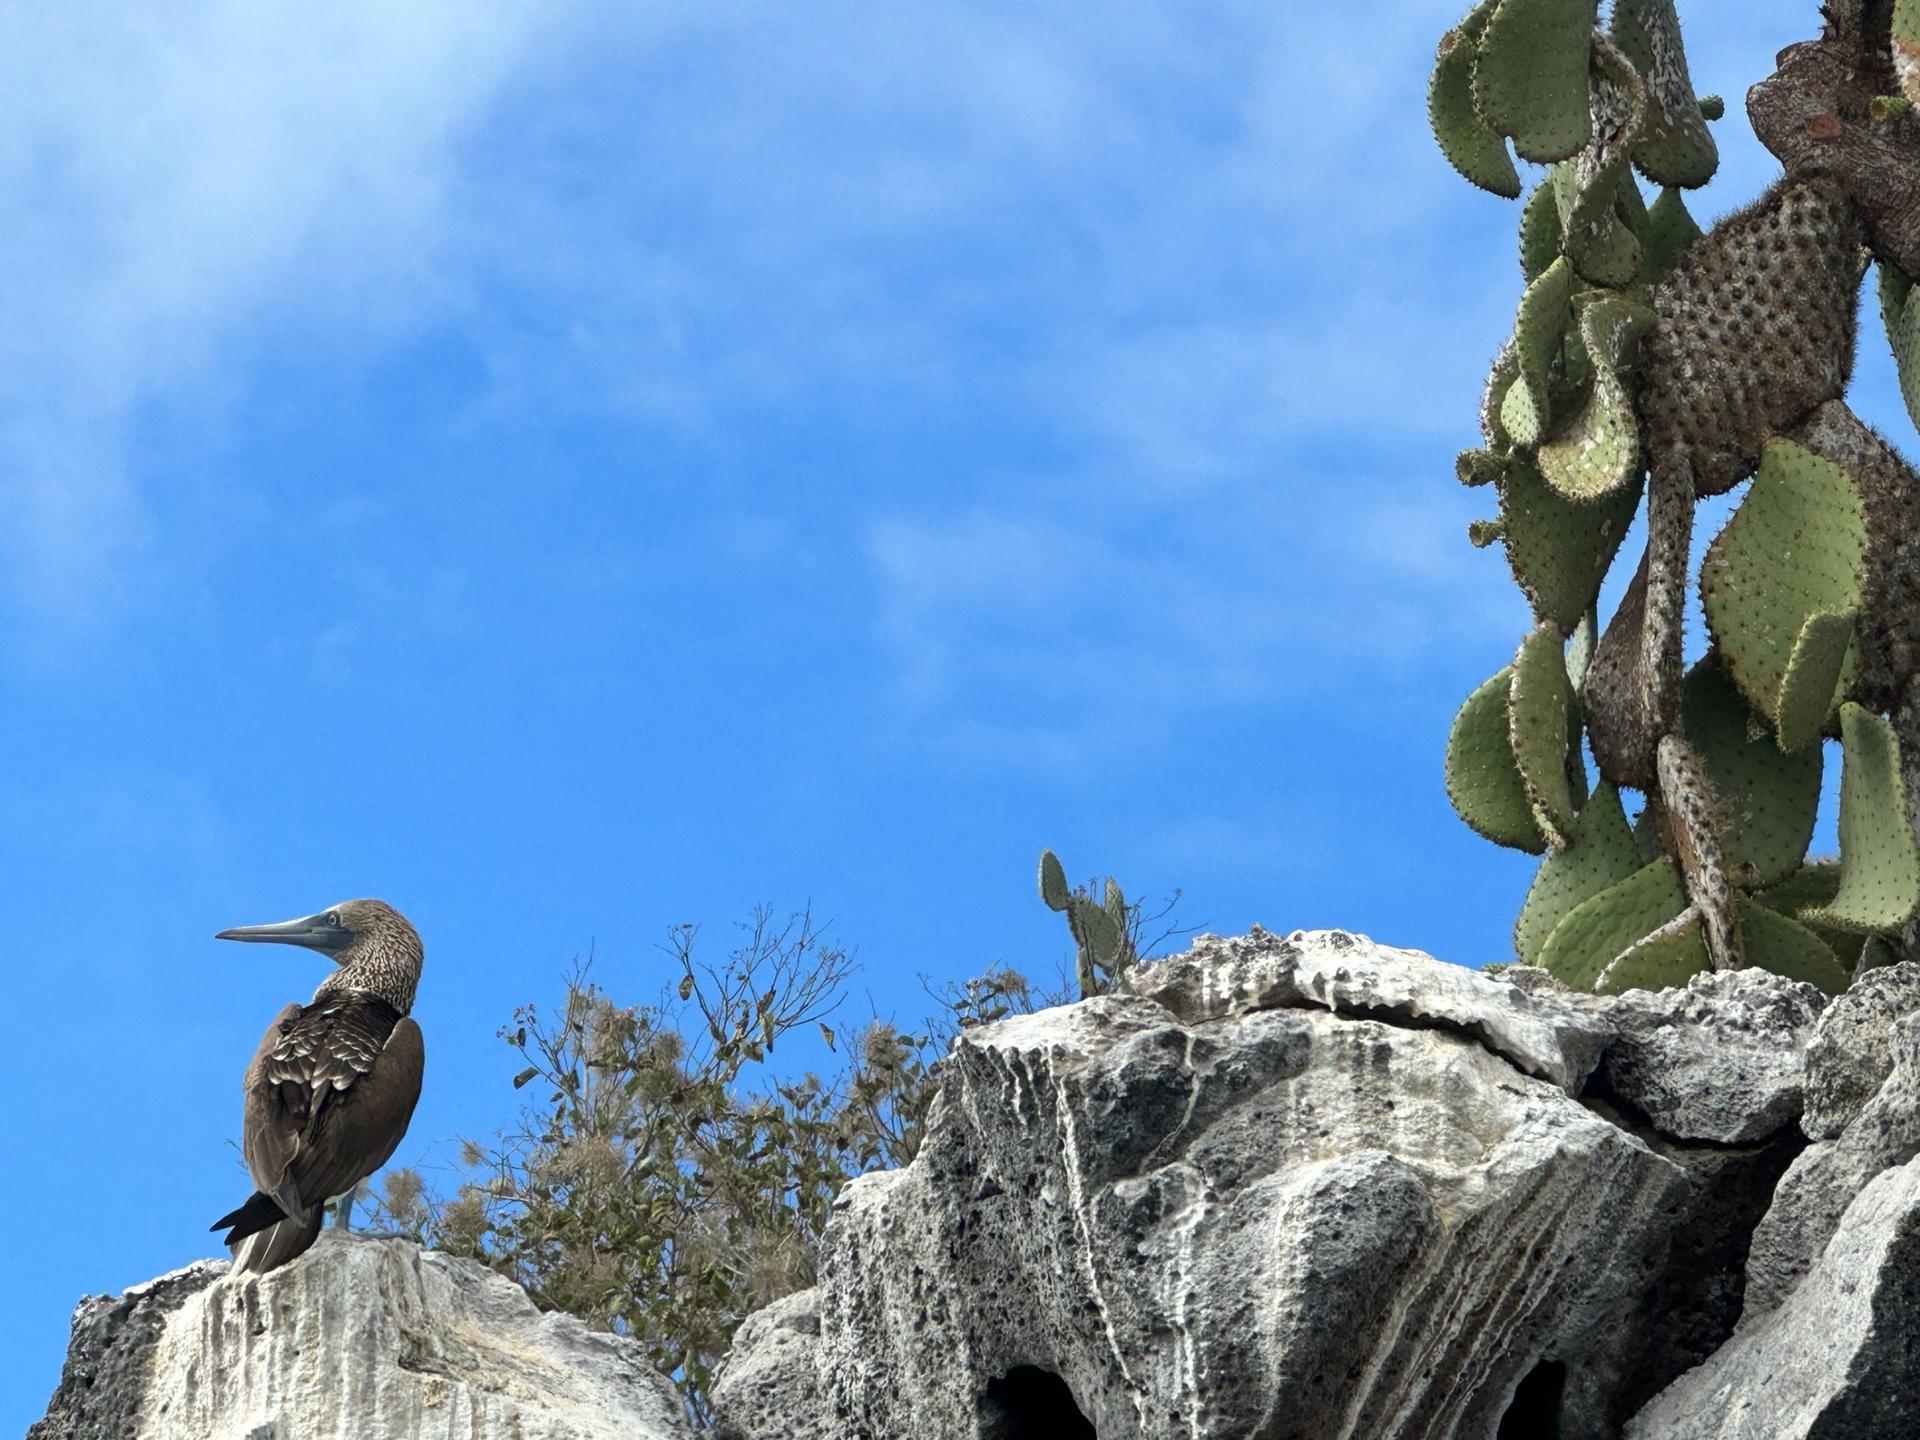 A blue-footed booby perches on a cliff on Santa Cruz Island in the Galapagos, part of an archipelago that is supports an rich diversity of animal and marine life, Galapagos islands, July 12, 2023